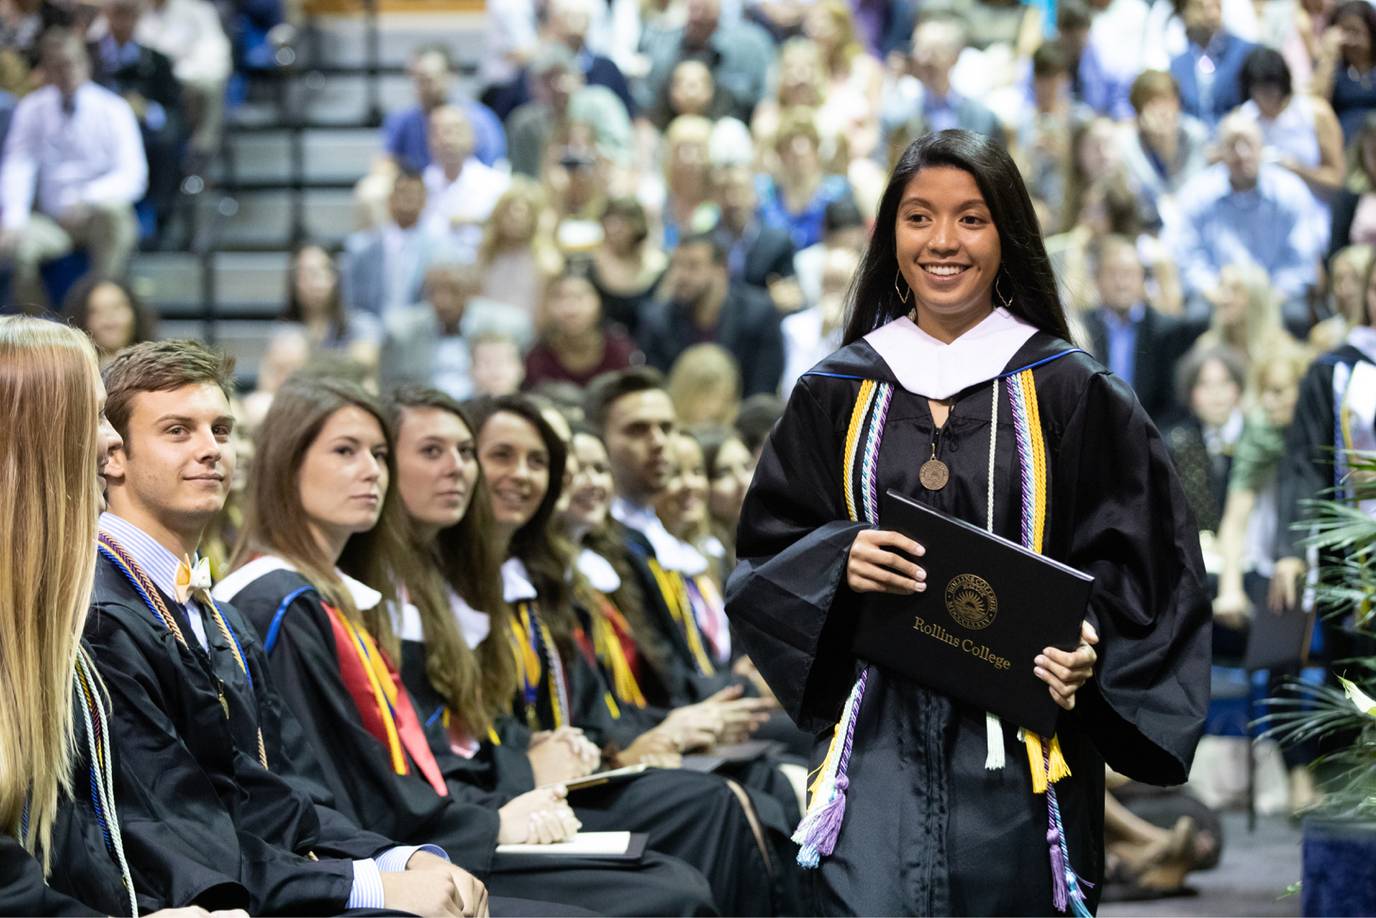 Gabbie Buendia ’19 receives her diploma at Rollins College's commencement ceremony.